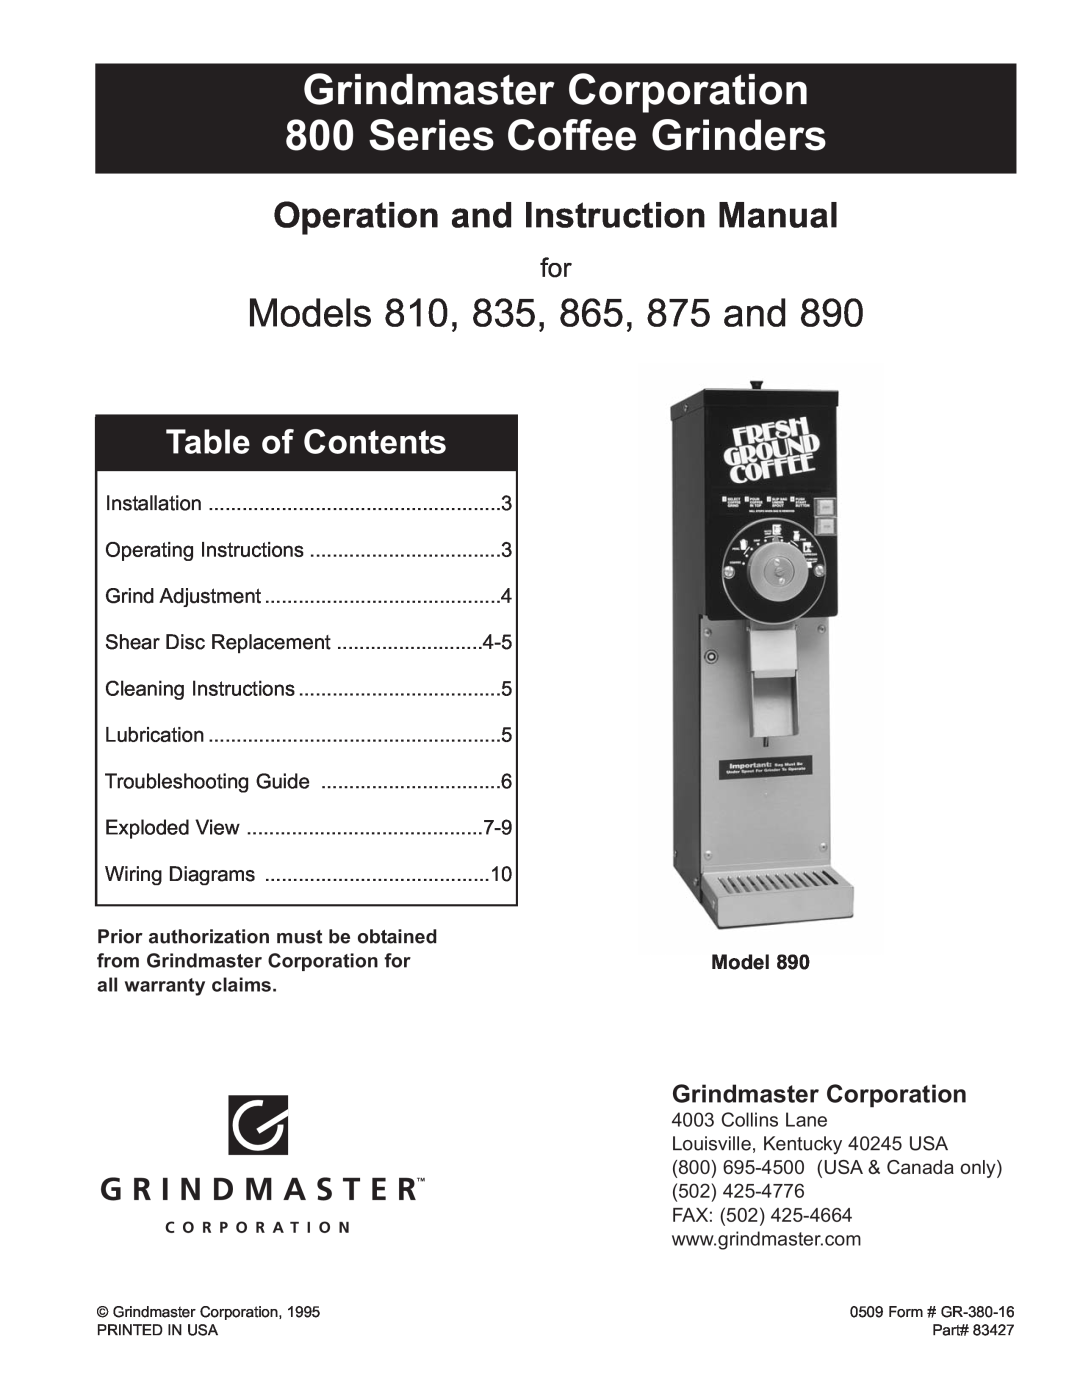 Grindmaster instruction manual Grindmaster Corporation, Series Coffee Grinders, Models 810, 835, 865, 875 and 